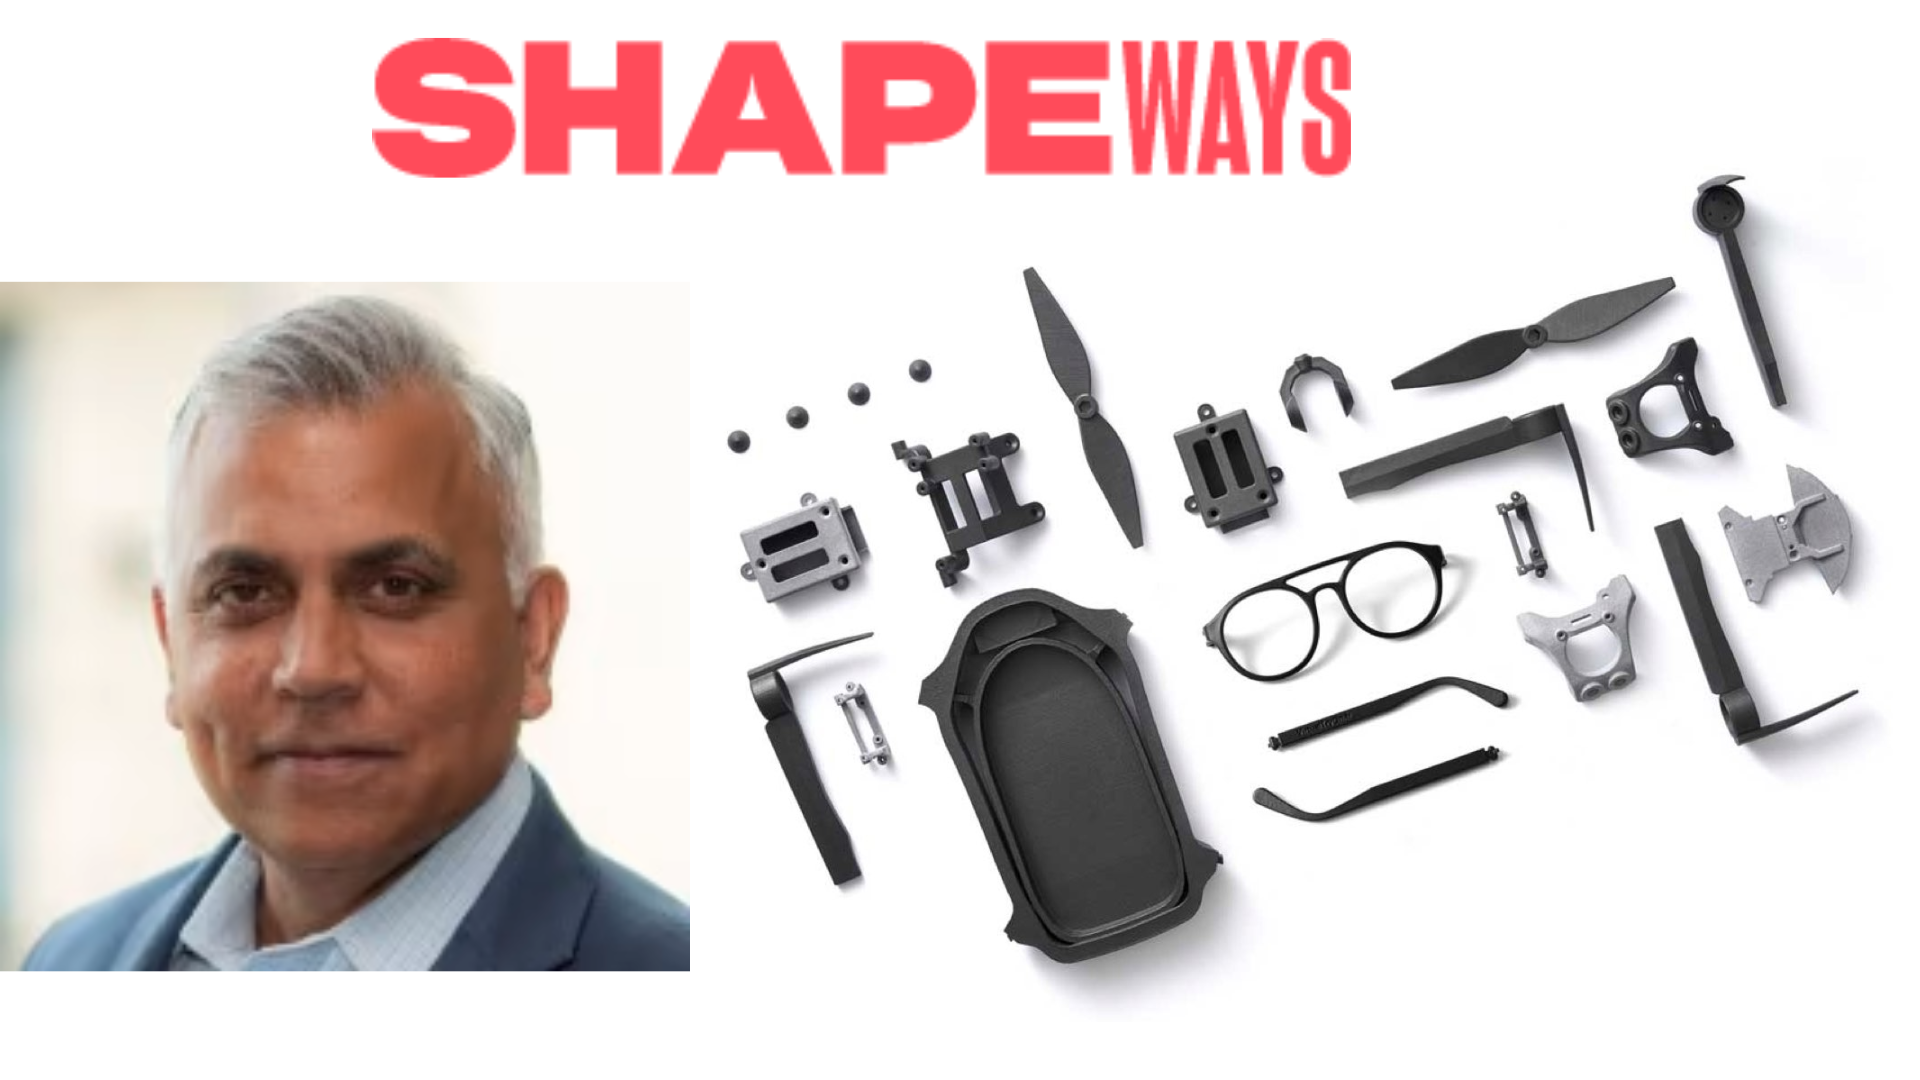 Shapeways, Inc. announced that digital industry veteran Raj Batra has been appointed to the Company’s Board of Directors as an independent director